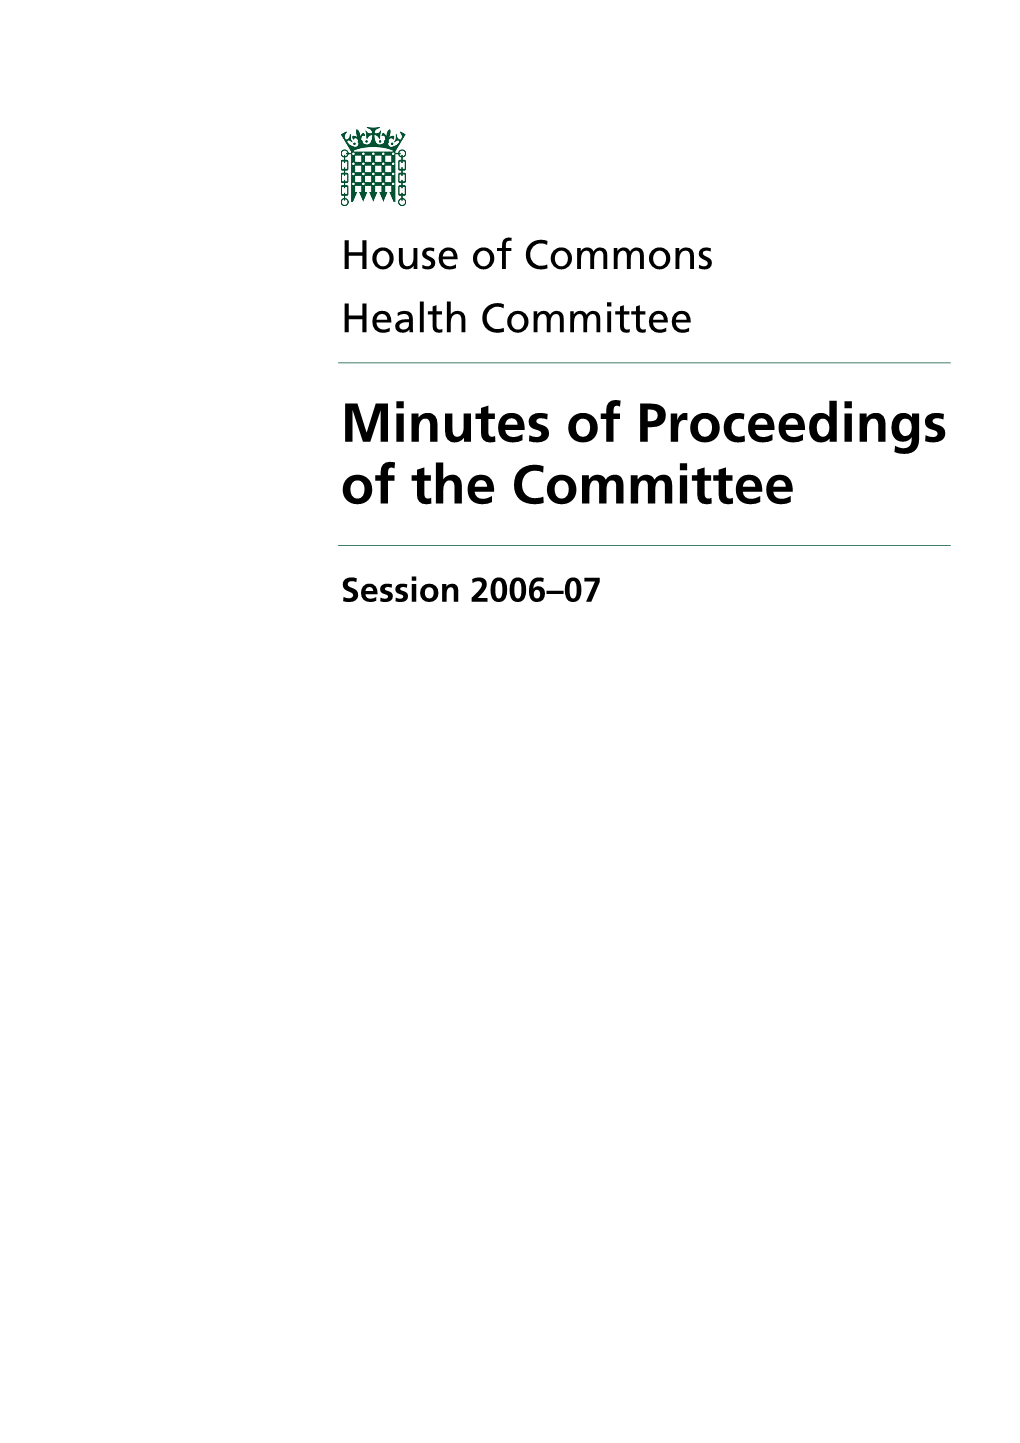 Minutes of Proceedings of the Committee